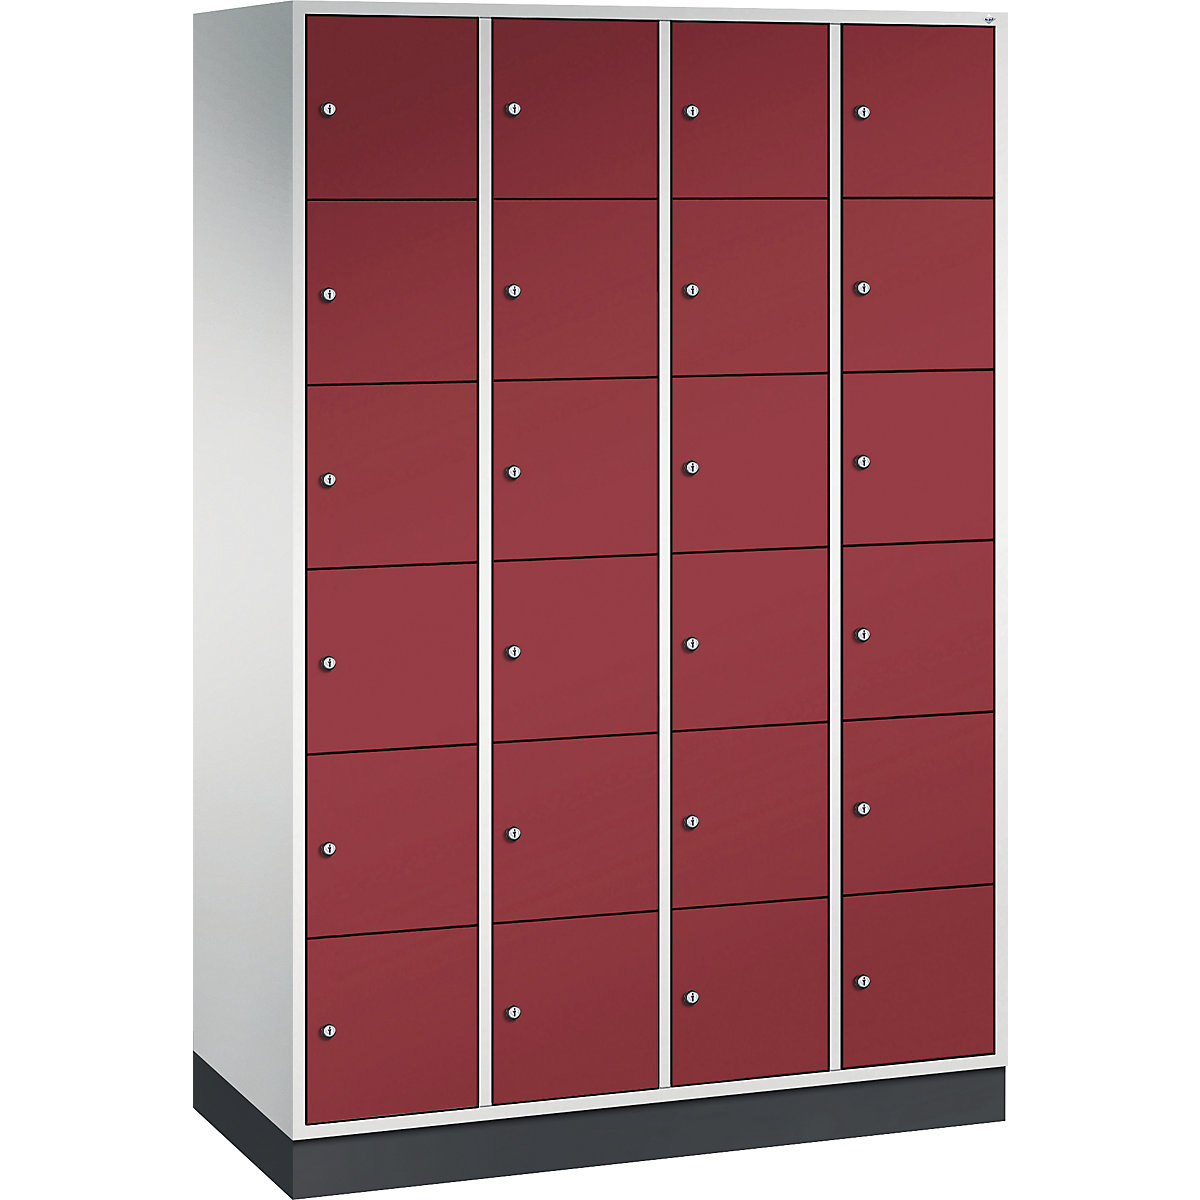 INTRO steel compartment locker, compartment height 285 mm – C+P, WxD 1220 x 500 mm, 24 compartments, light grey body, ruby red doors-16